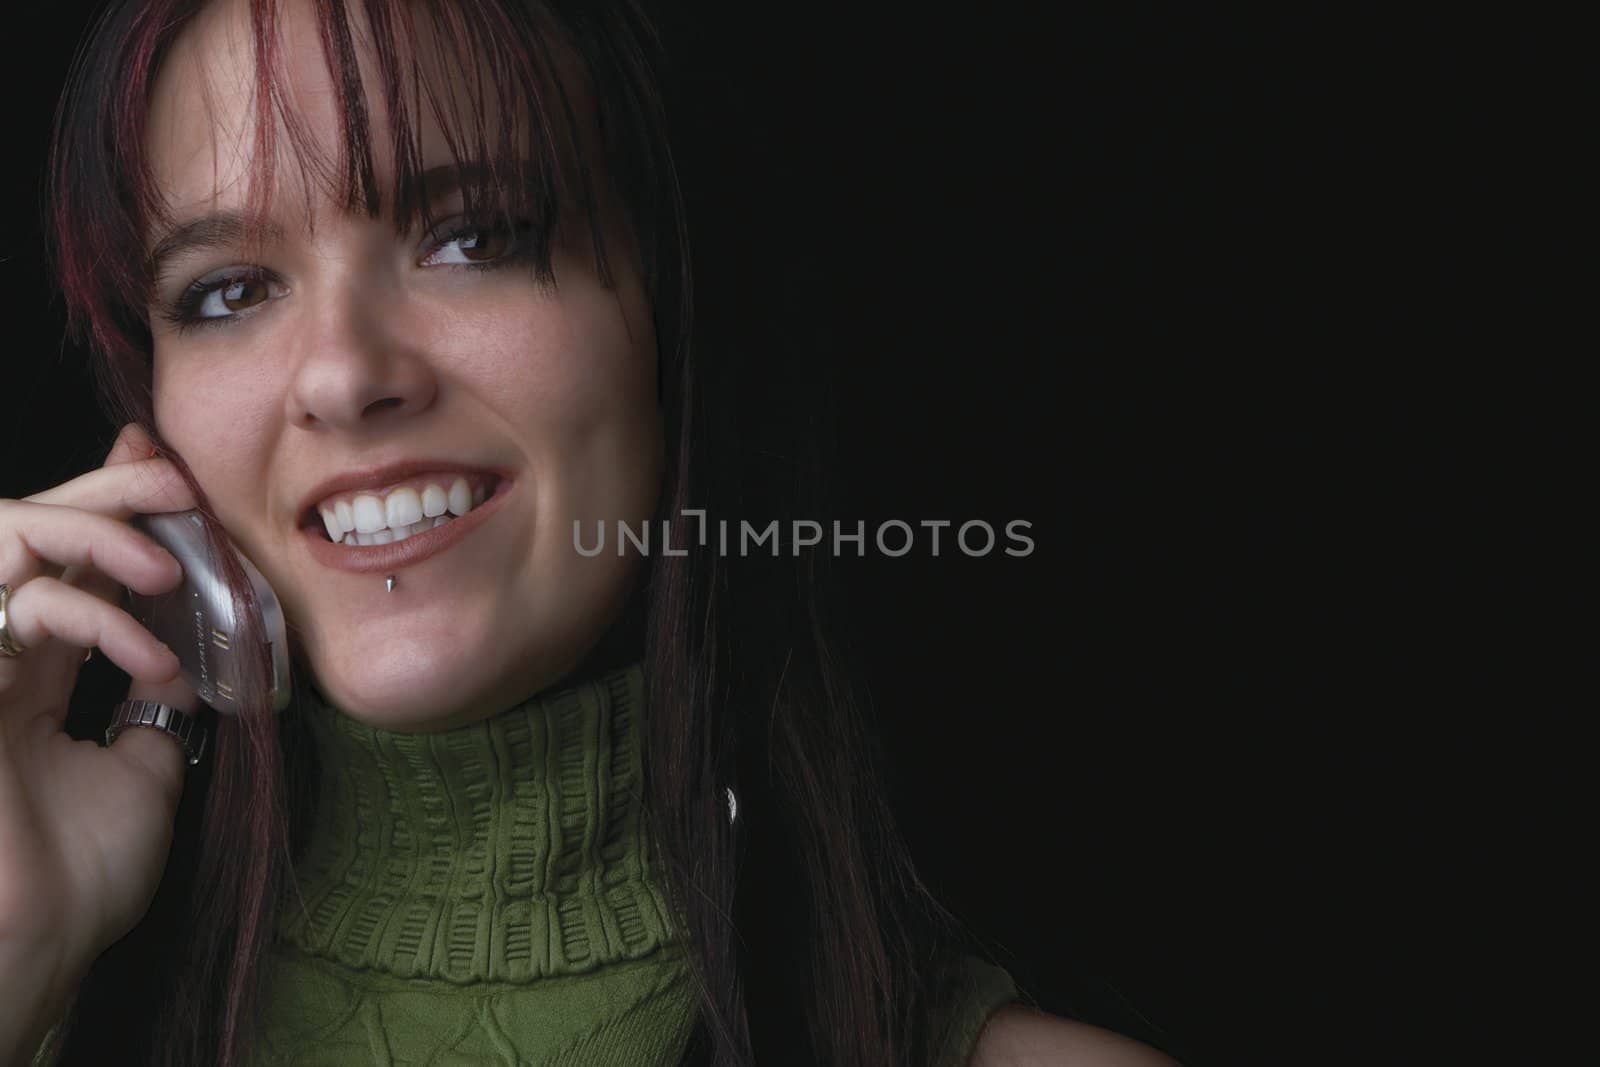 Close up portrait of a twenty something fashion model smiling with a cell phone in hand